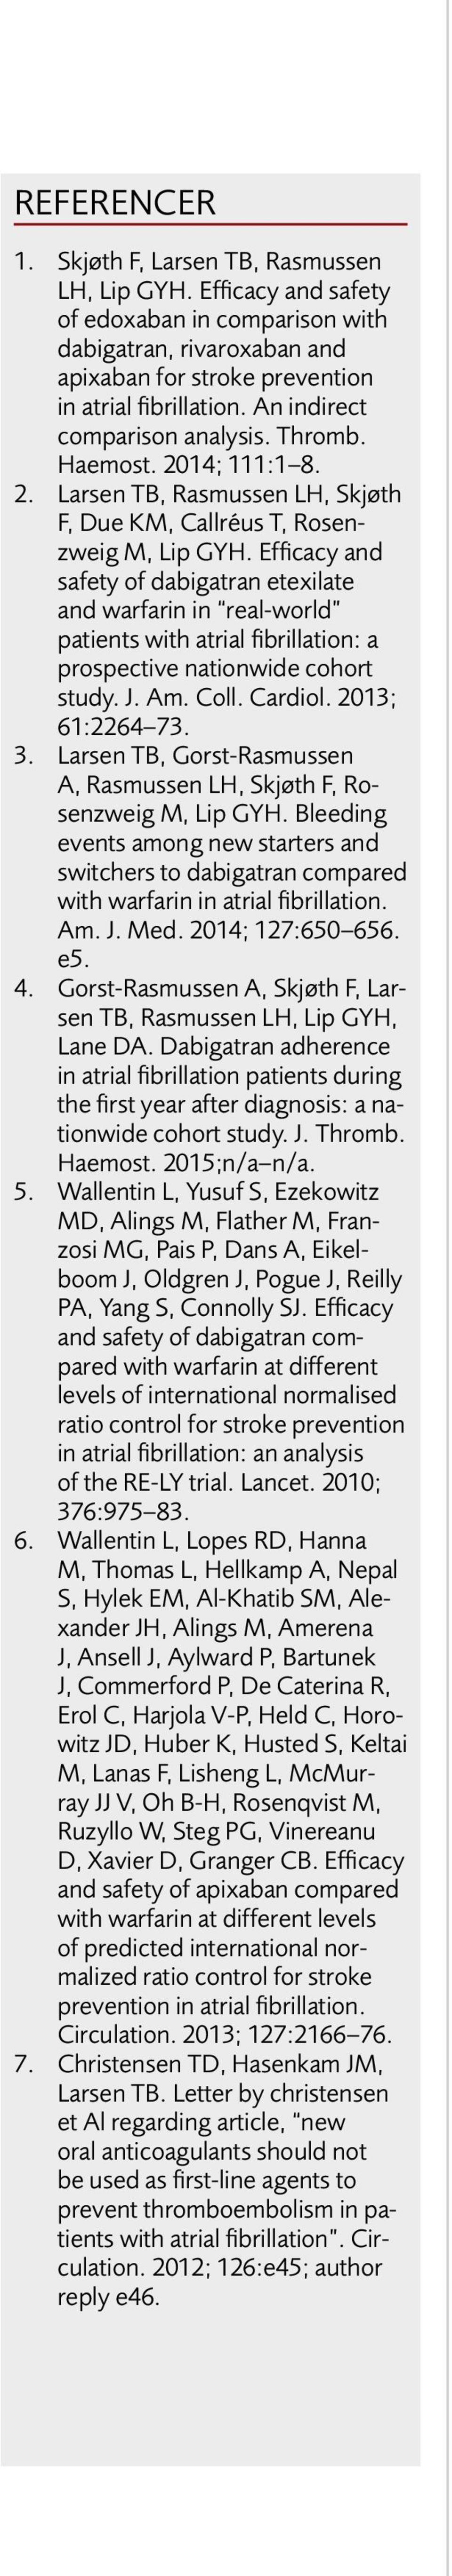 Efficacy and safety of dabigatran etexilate and warfarin in real-world patients with atrial fibrillation: a prospective nationwide cohort study. J. Am. Coll. Cardiol. 2013; 61:2264 73. 3.